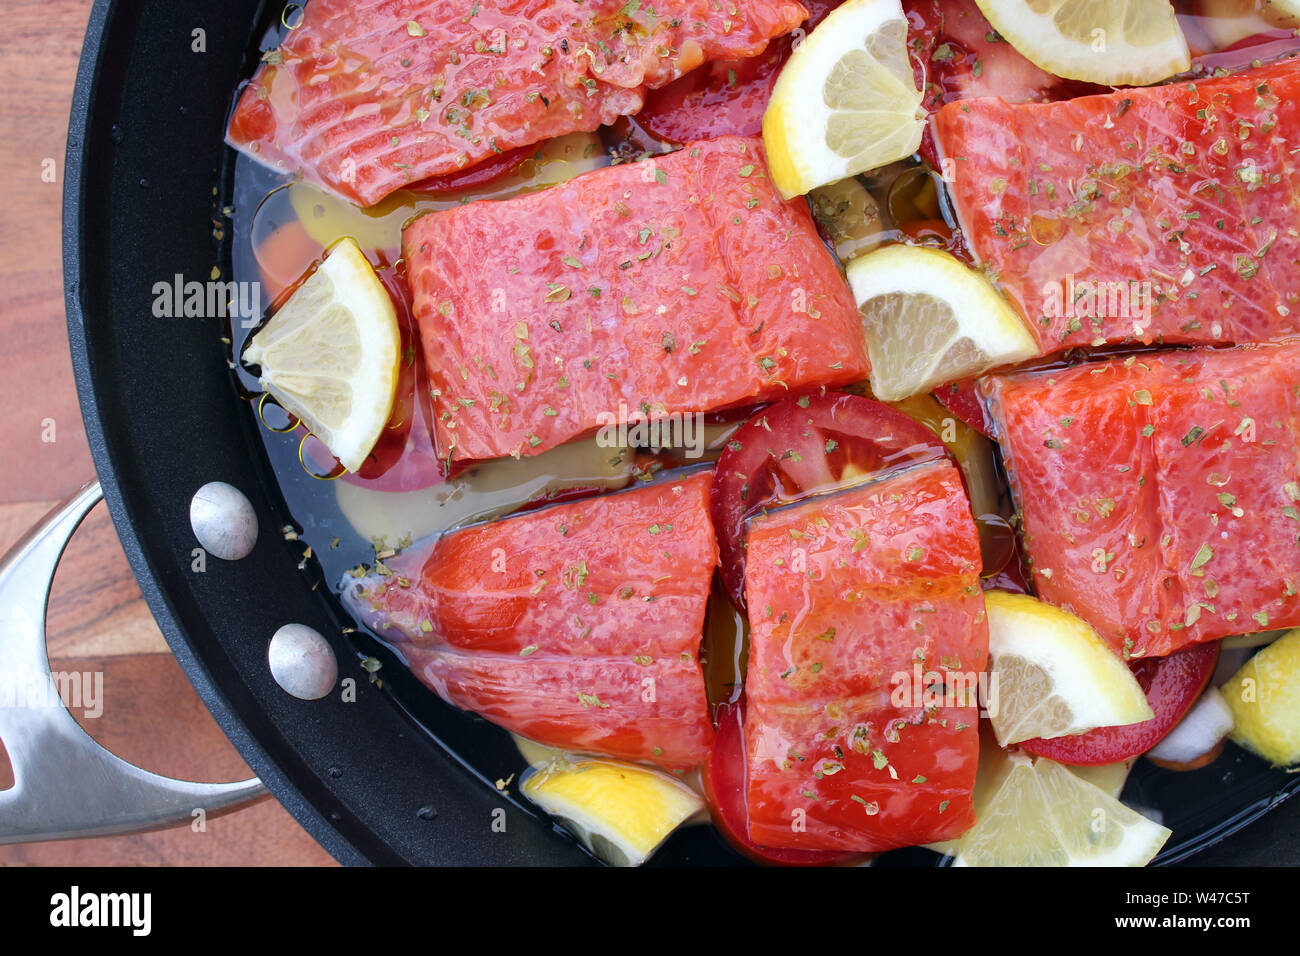 Poaching sockeye salmon fillets in water with vegetables and lemon Stock Photo